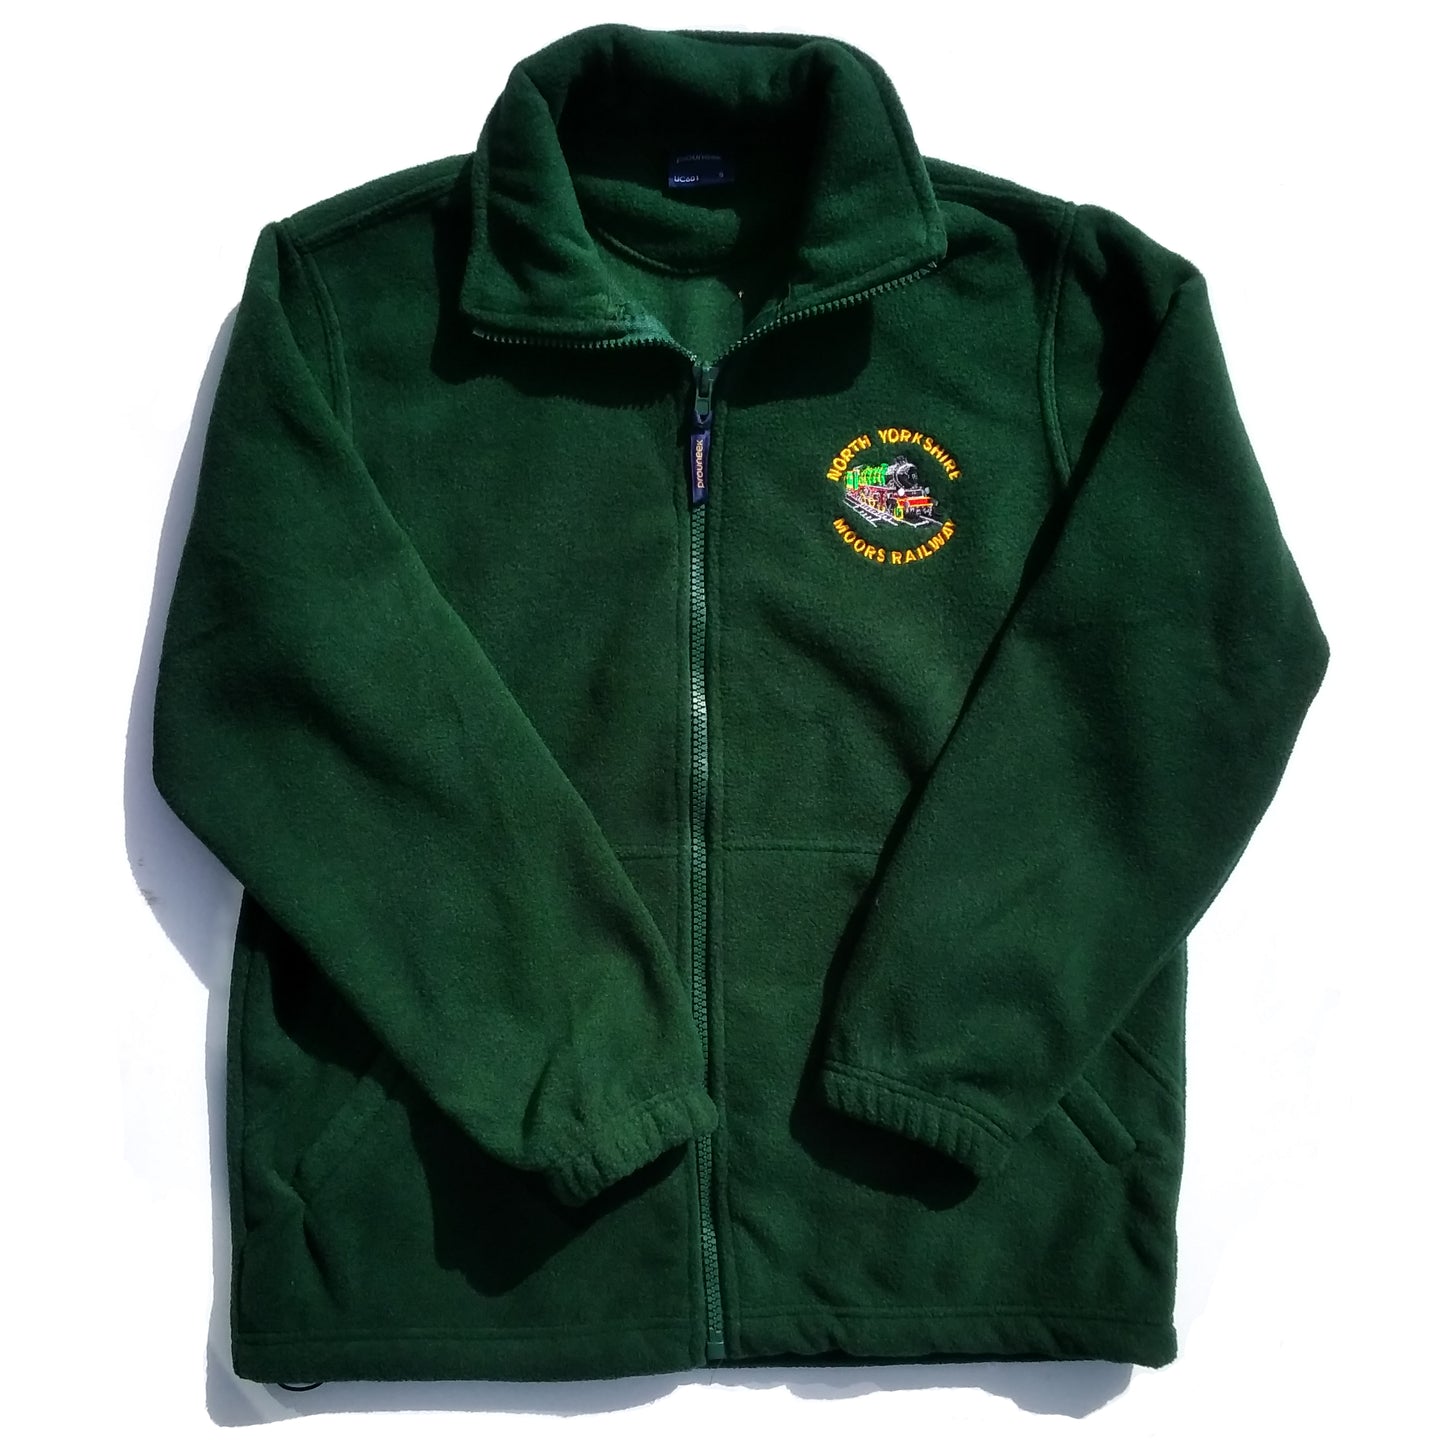 Green zipped fleece with North Yorkshire Moors Railway in gold with a coloured picture of a steam engine embroidered on the left front.